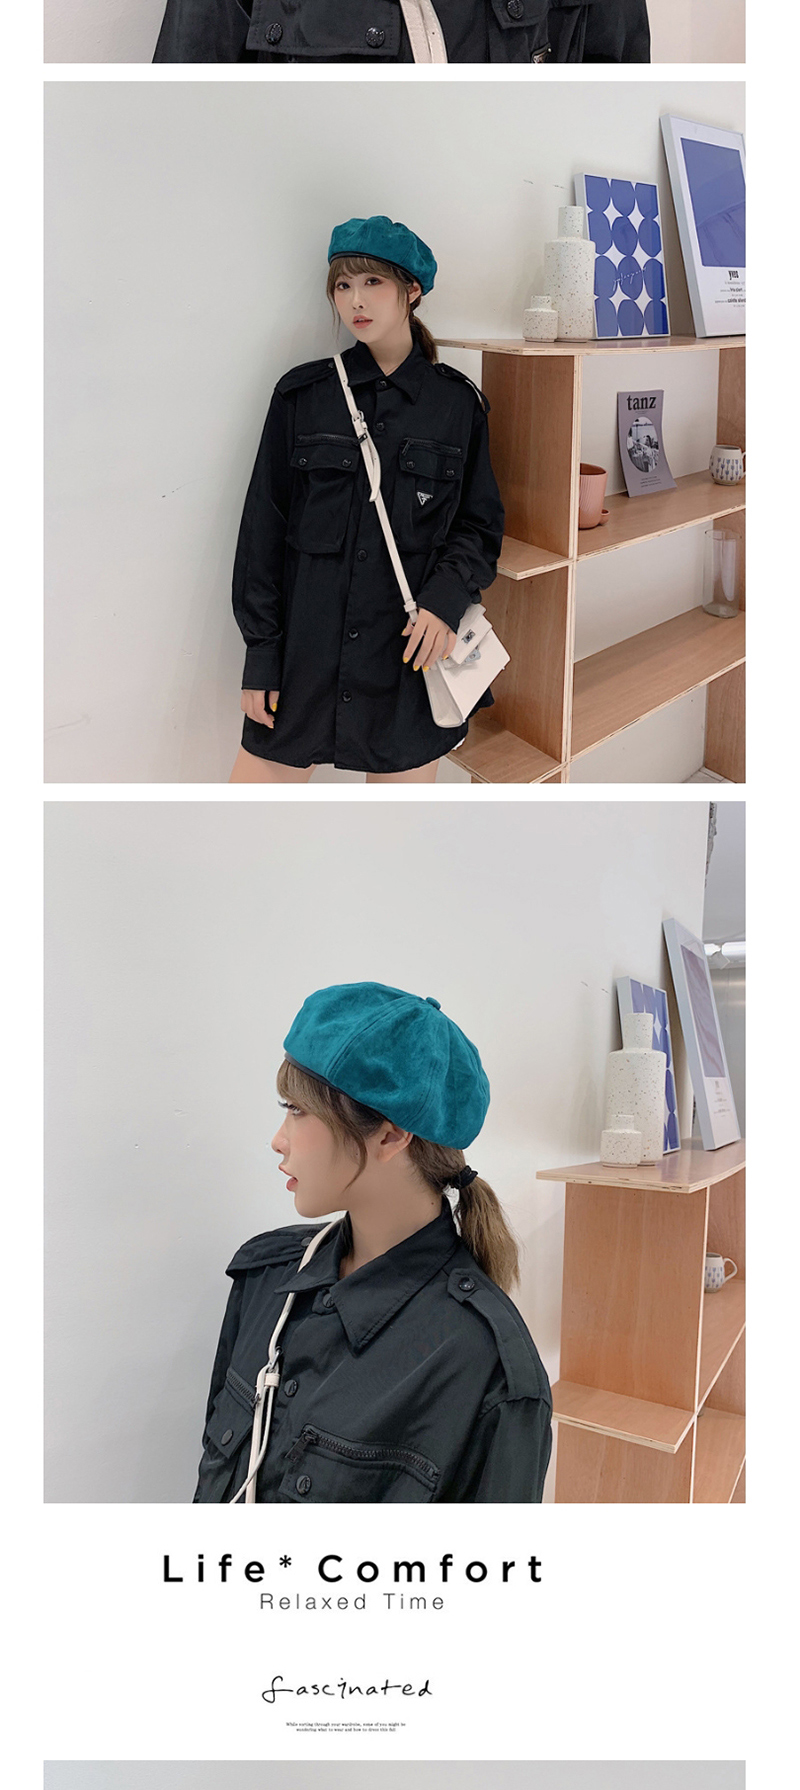 Fashion Black Solid Color Beret,Beanies&Others